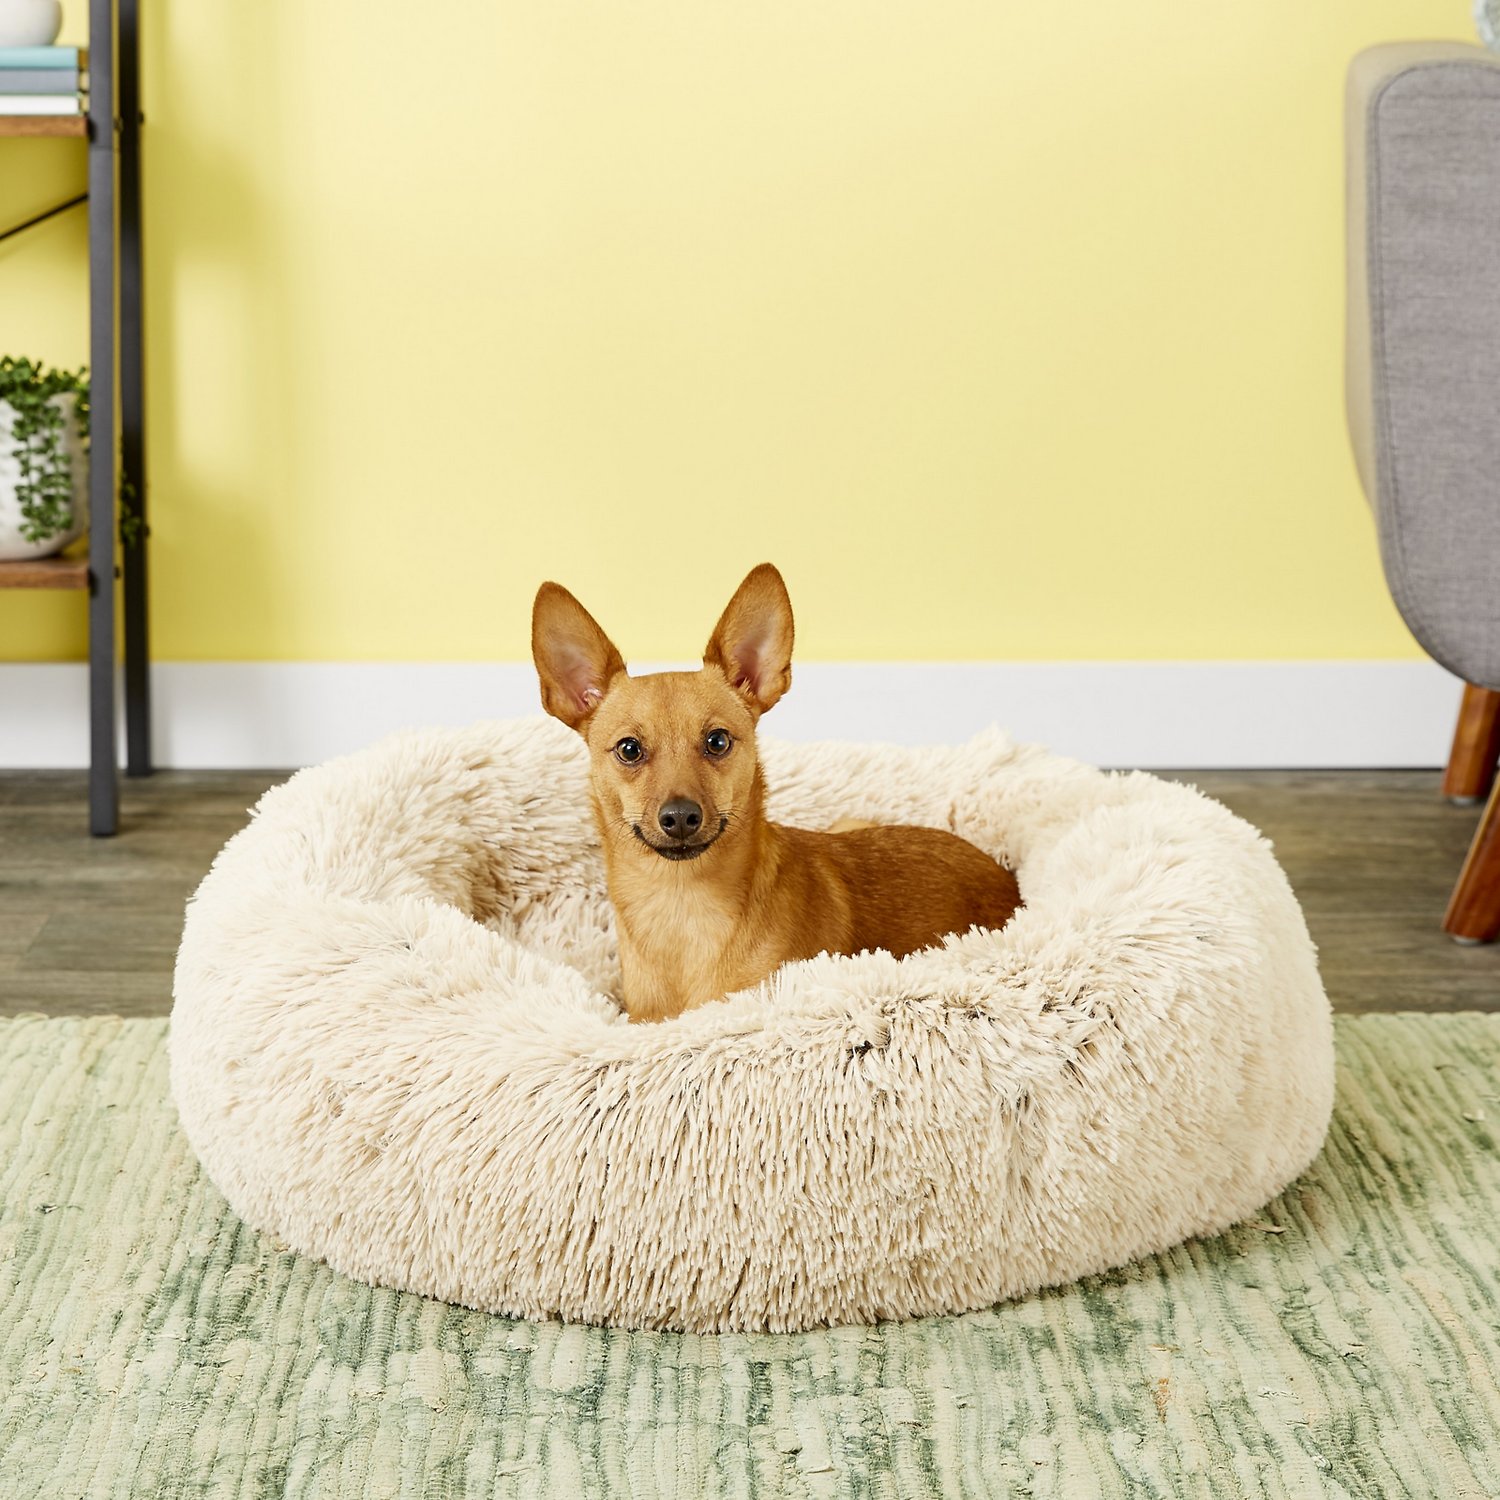 Doggie pillow. 2 +80 Adorable Dog Bed Designs That Will Surprise You - 14